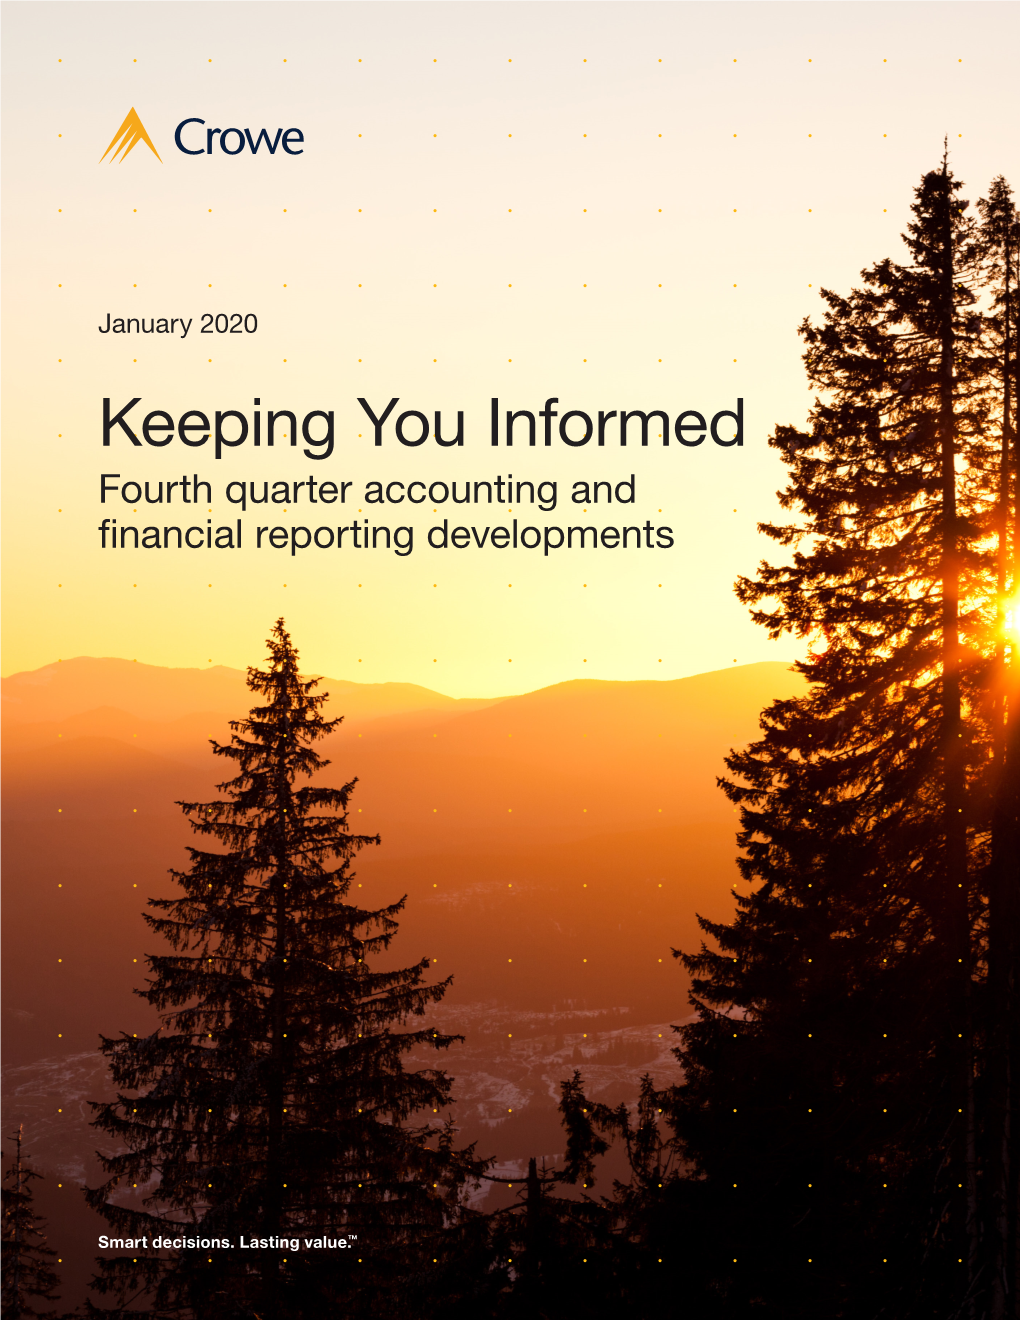 Fourth Quarter Accounting and Financial Reporting Developments